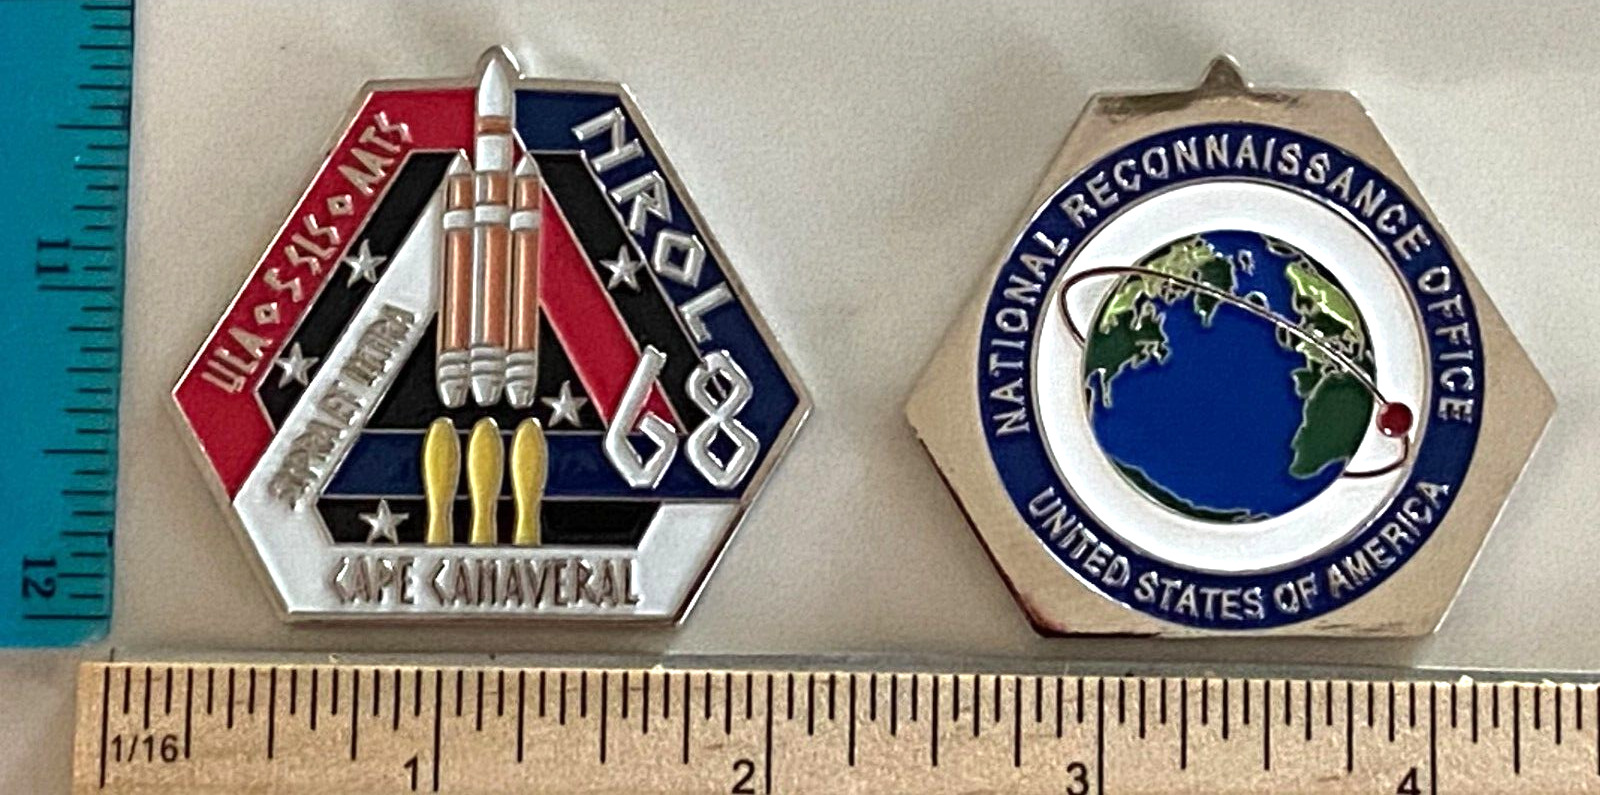 MILITARY BLACK OPS CHALLENGE COIN - NROL-68 CAPE CANAVERAL SUPRA ET ULTRA